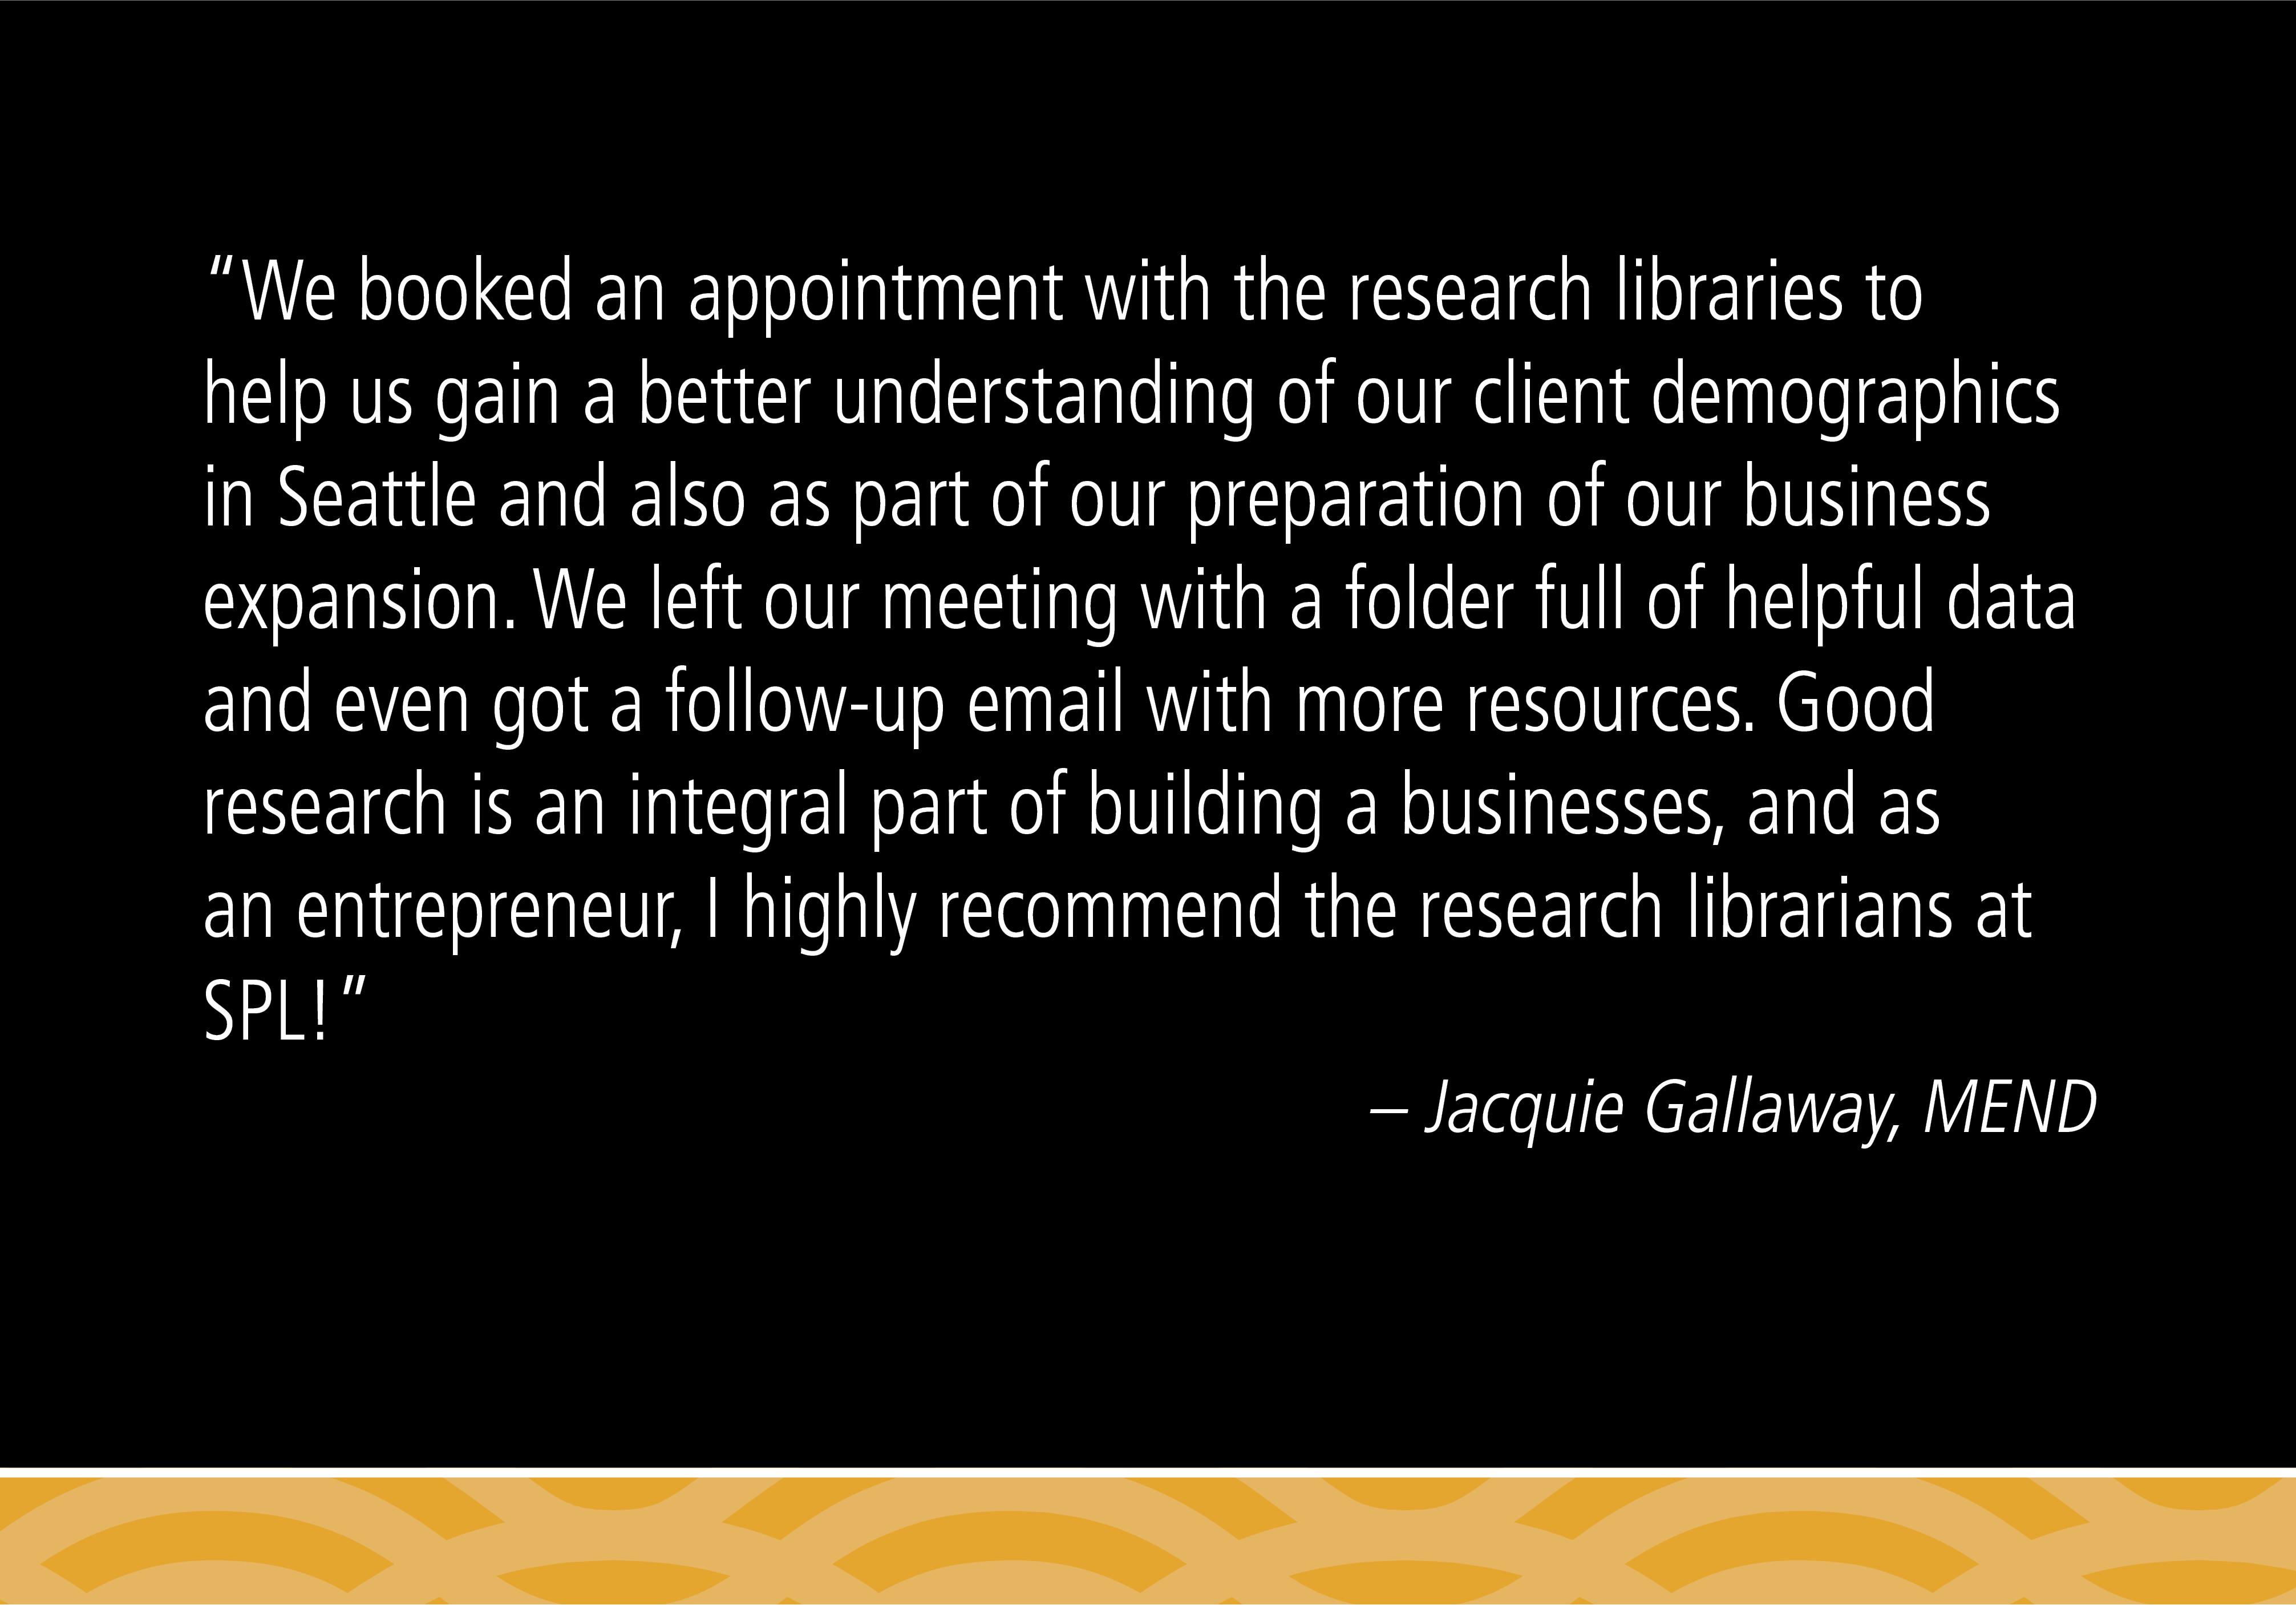 “We booked an appointment with the research libraries to help us gain a better understanding of our client demographics in Seattle and also as part of our preparation of our business expansion. We left our meeting with a folder full of helpful data and even got a follow-up email with more resources. Good research is an integral part of building a businesses, and as an entrepreneur, I highly recommend the research librarians at SPL!” -Jacquie Gallaway, MEND